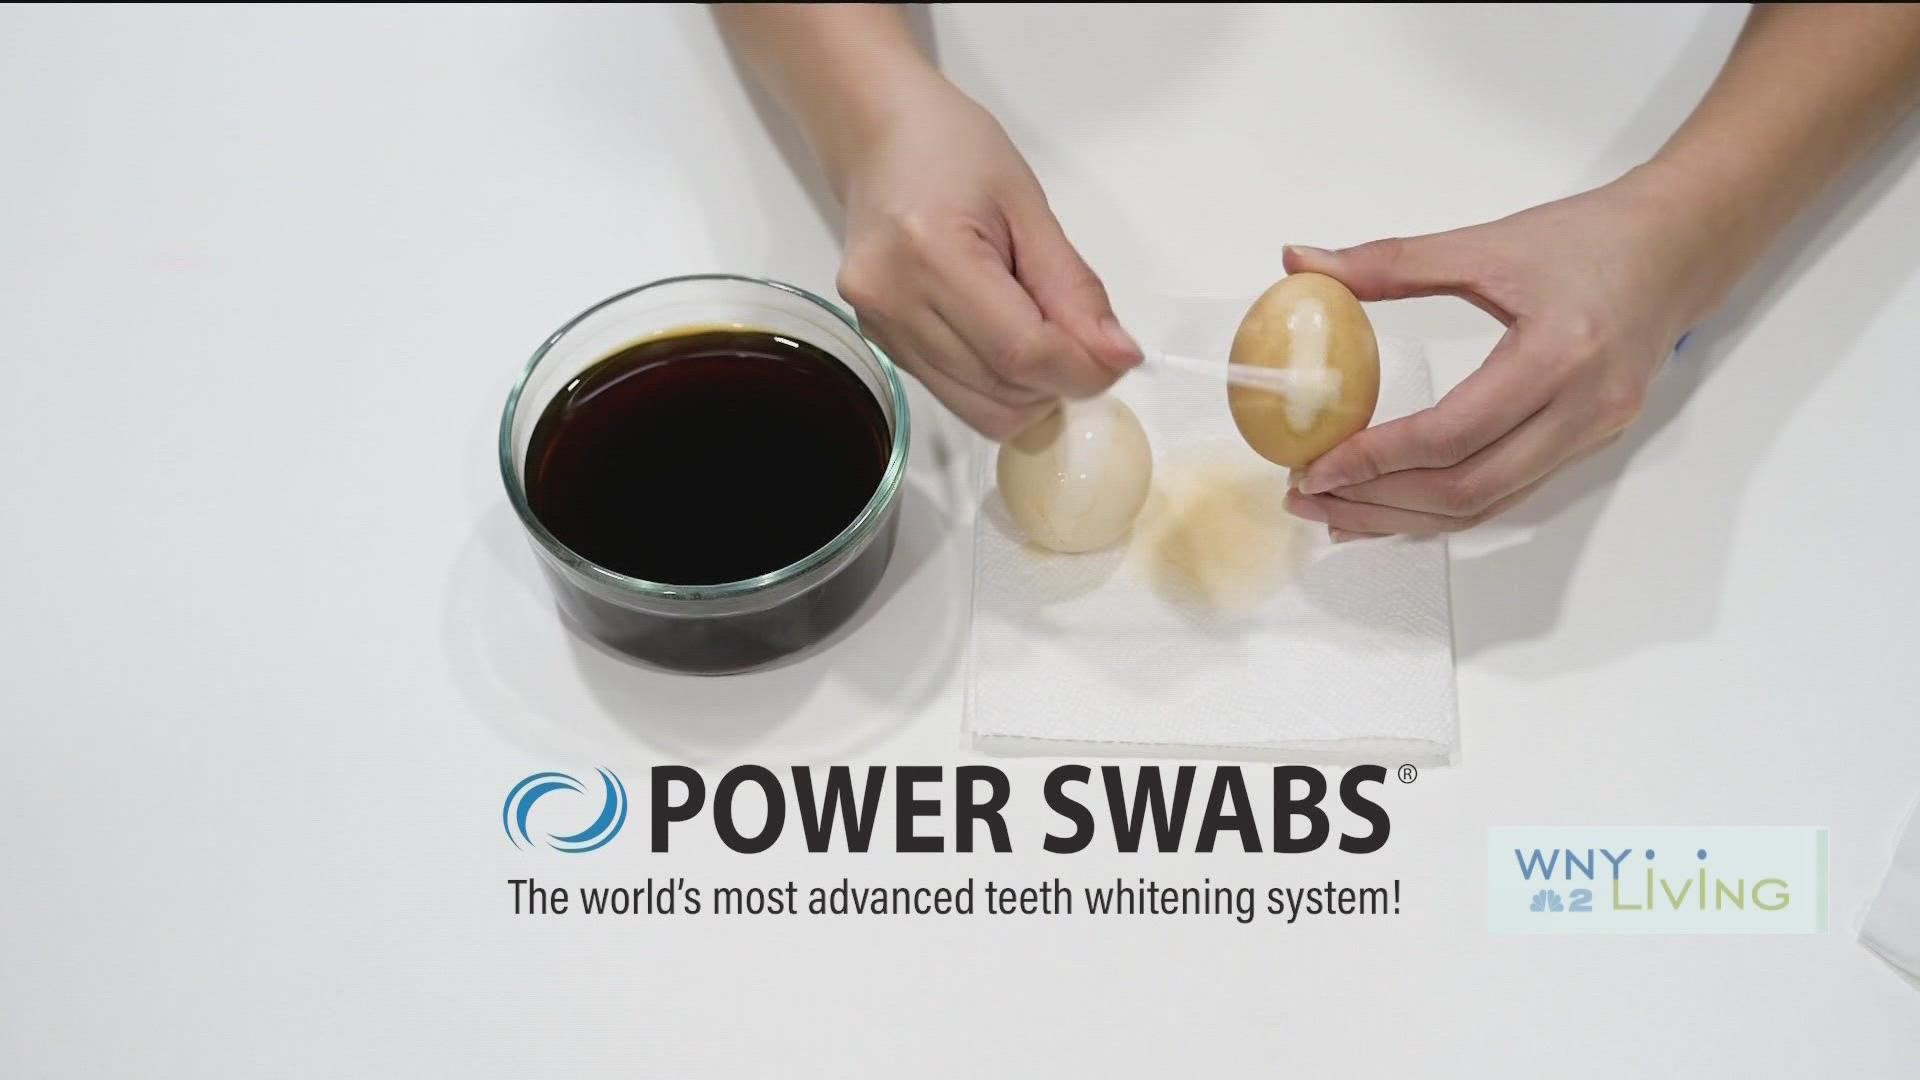 WNY Living - September 17 - Power Swabs (THIS VIDEO IS SPONSORED BY POWER SWABS)